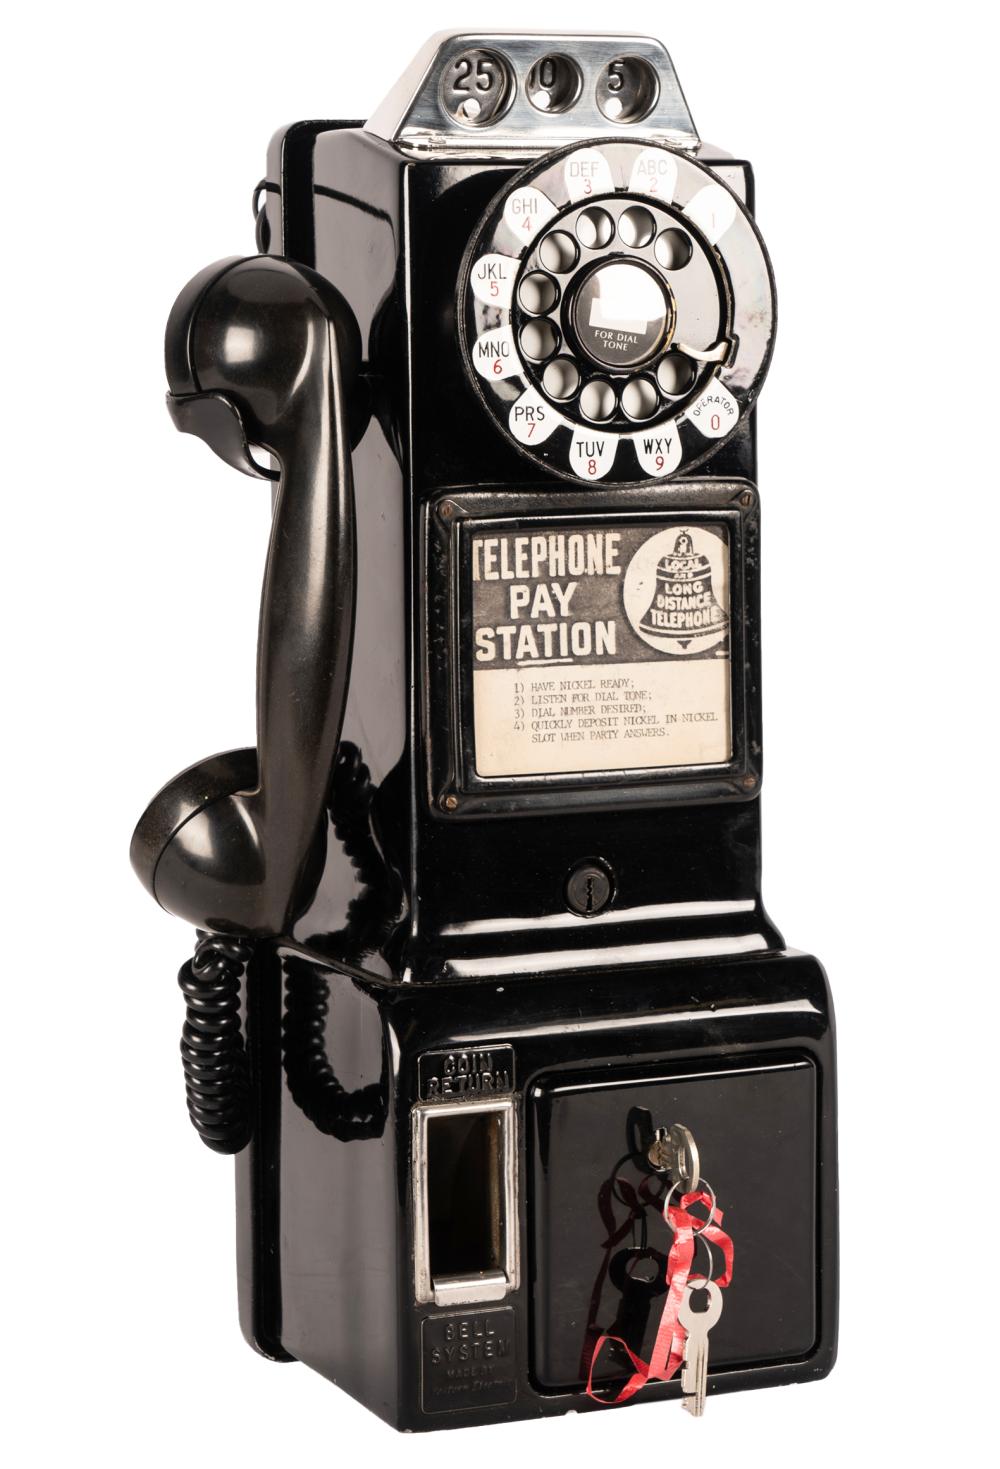 MODERN ELECTRIC PAY PHONEwith two keys;